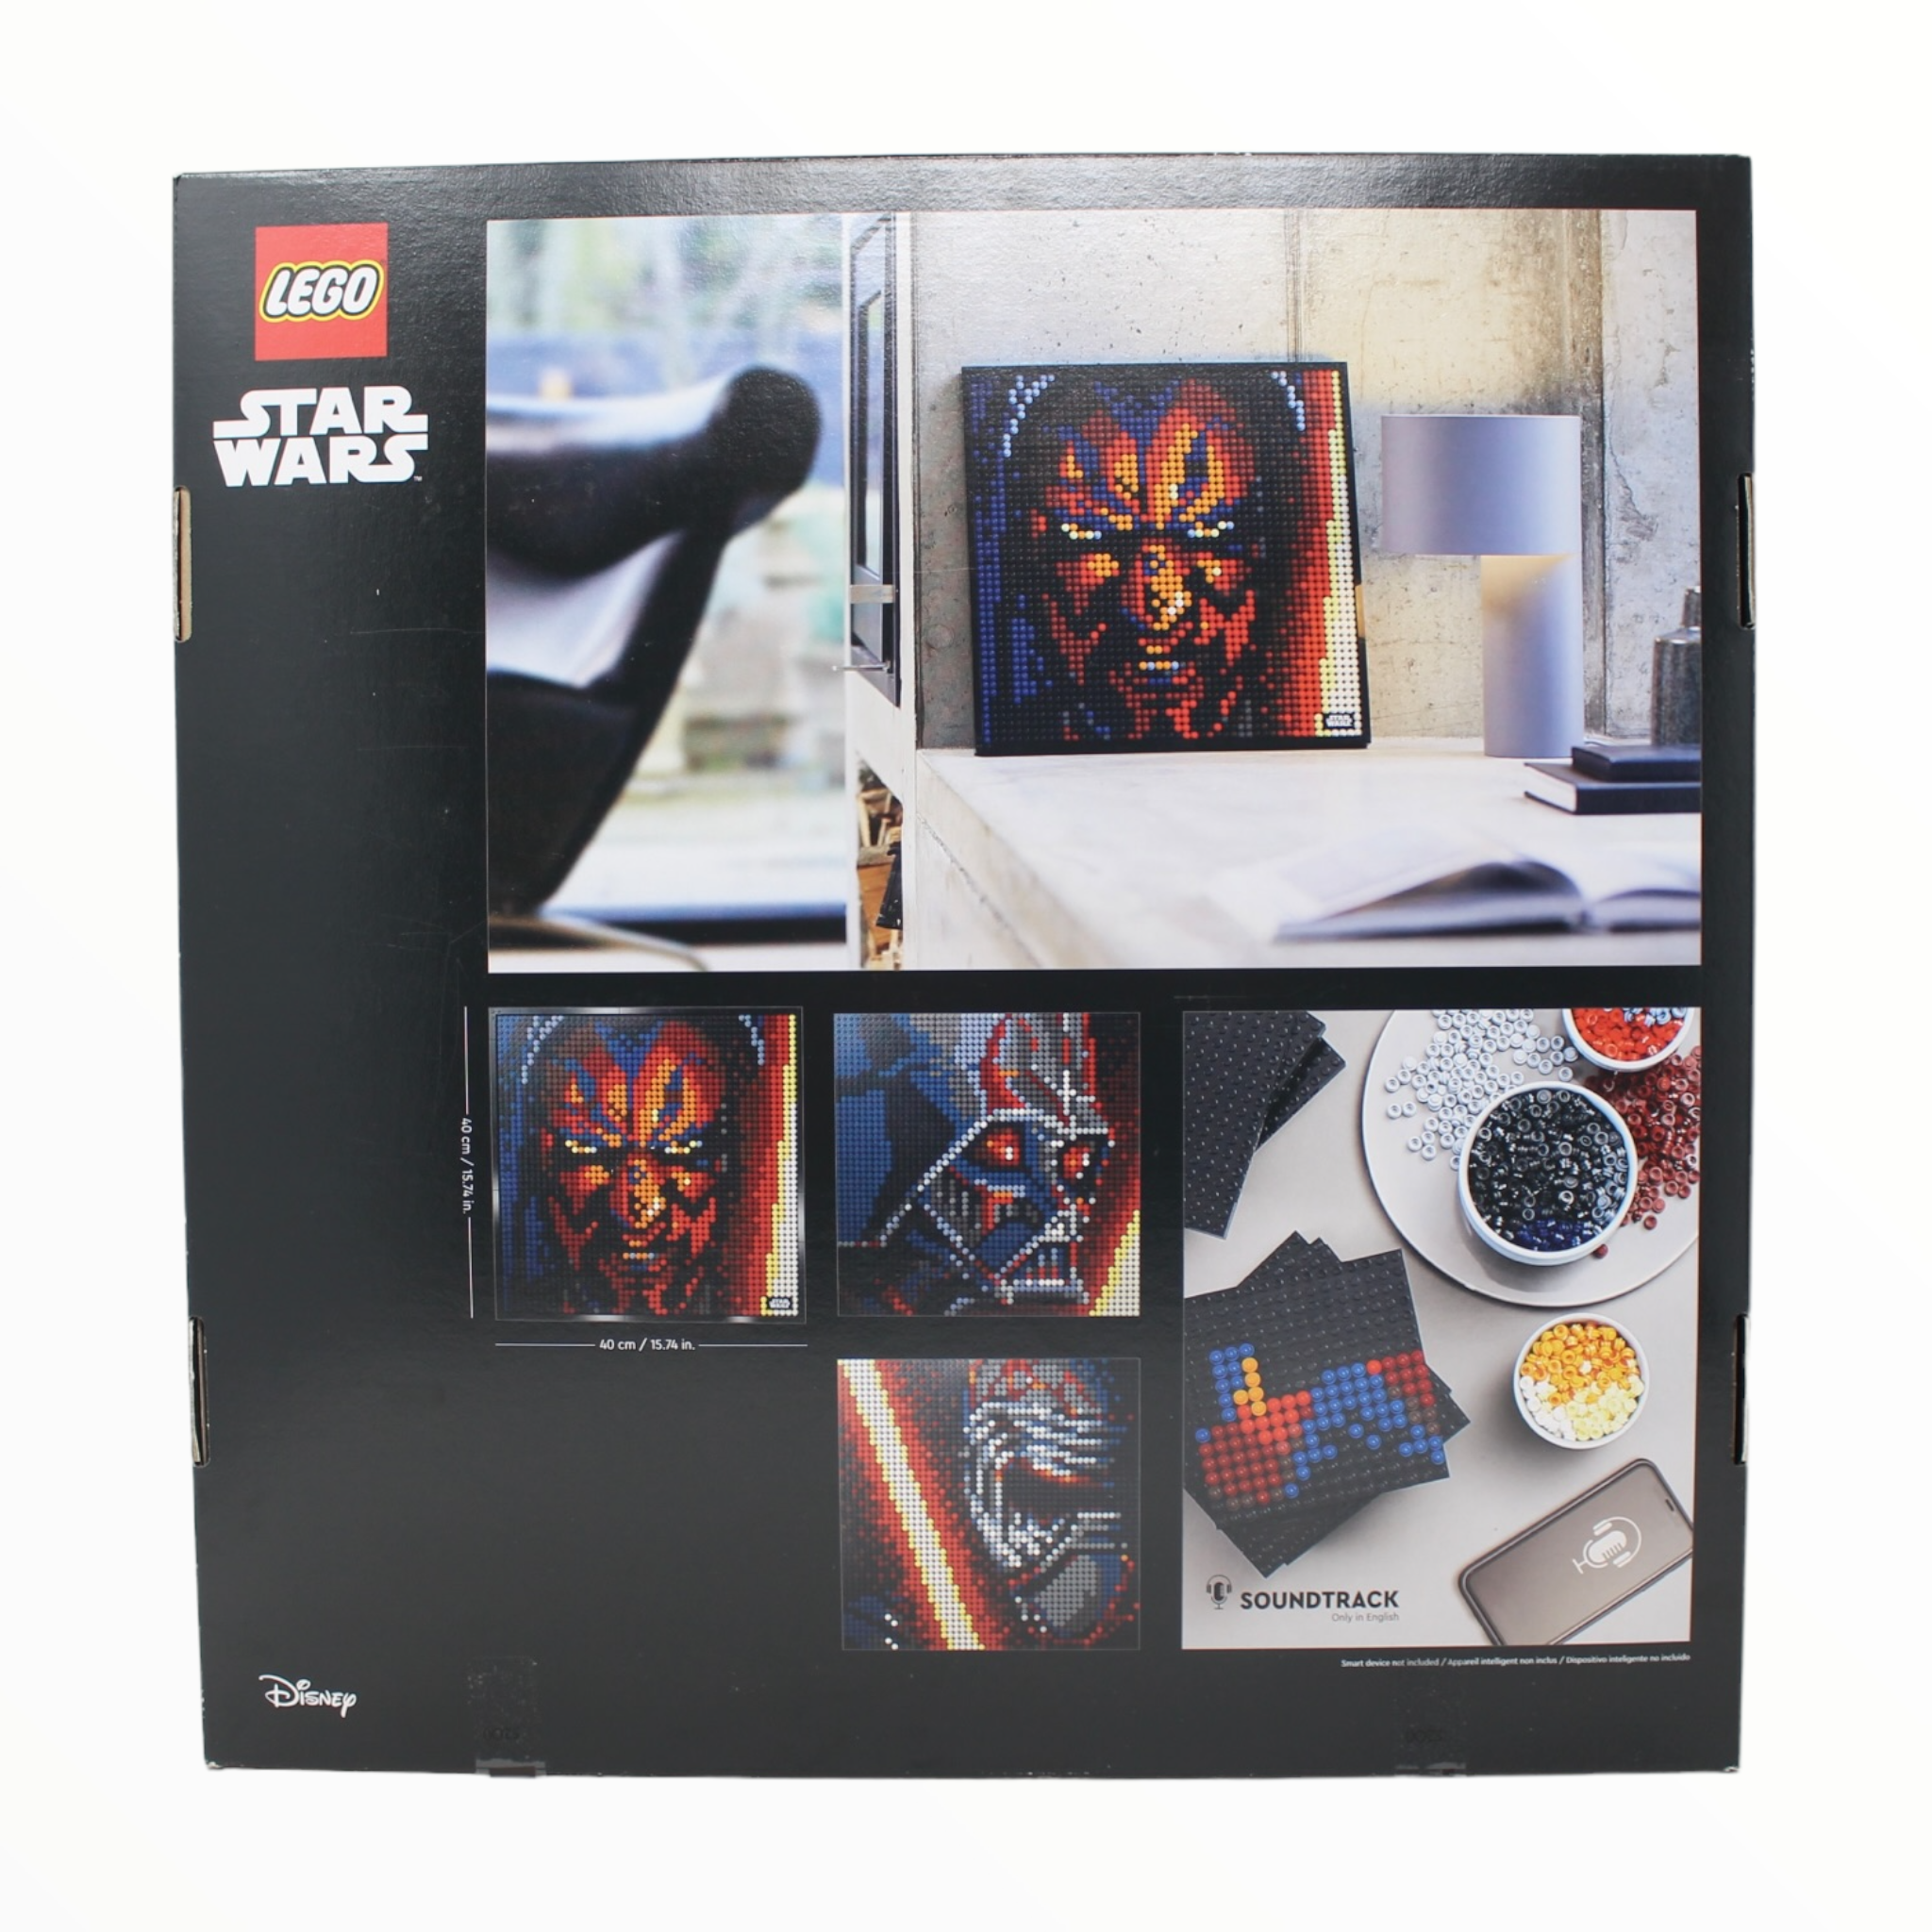 Retired Set 31200 Star Wars Mosaic The Sith